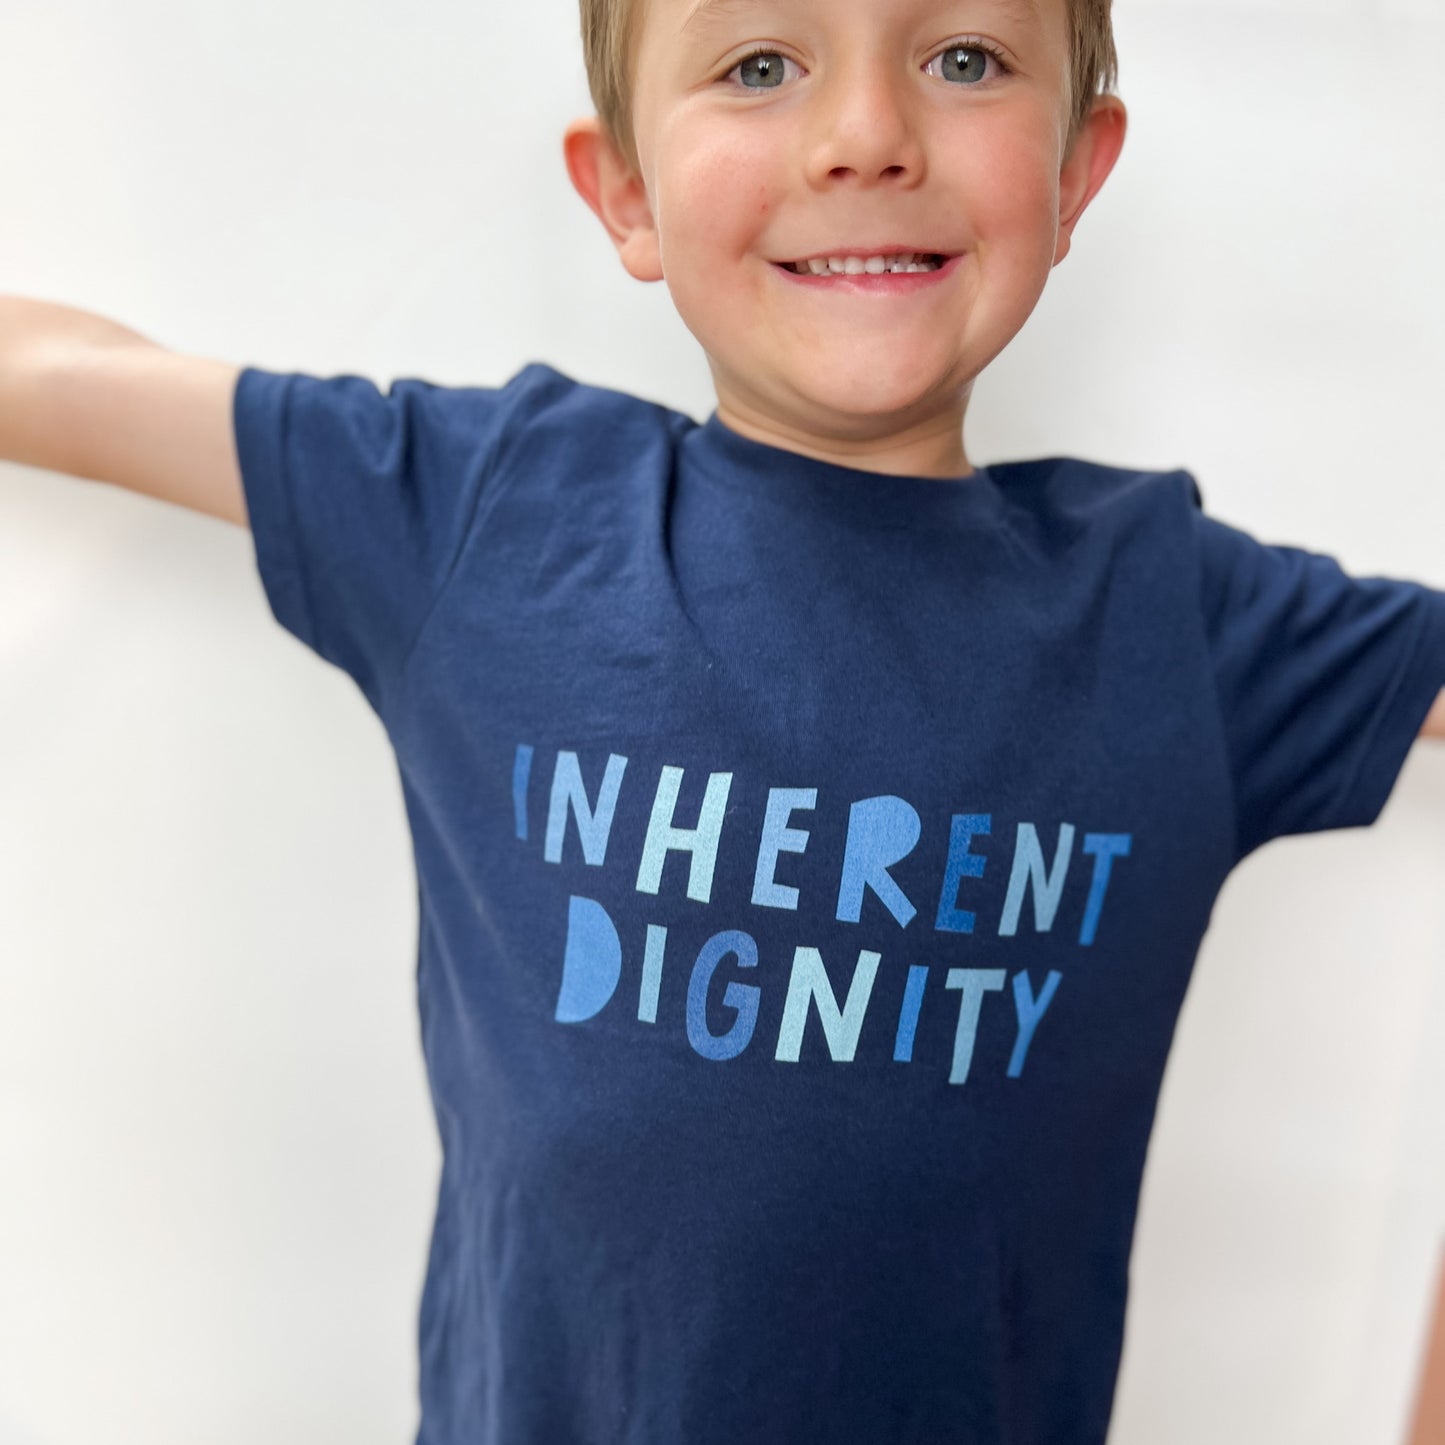 Inherent Dignity Toddler and Youth T-Shirt